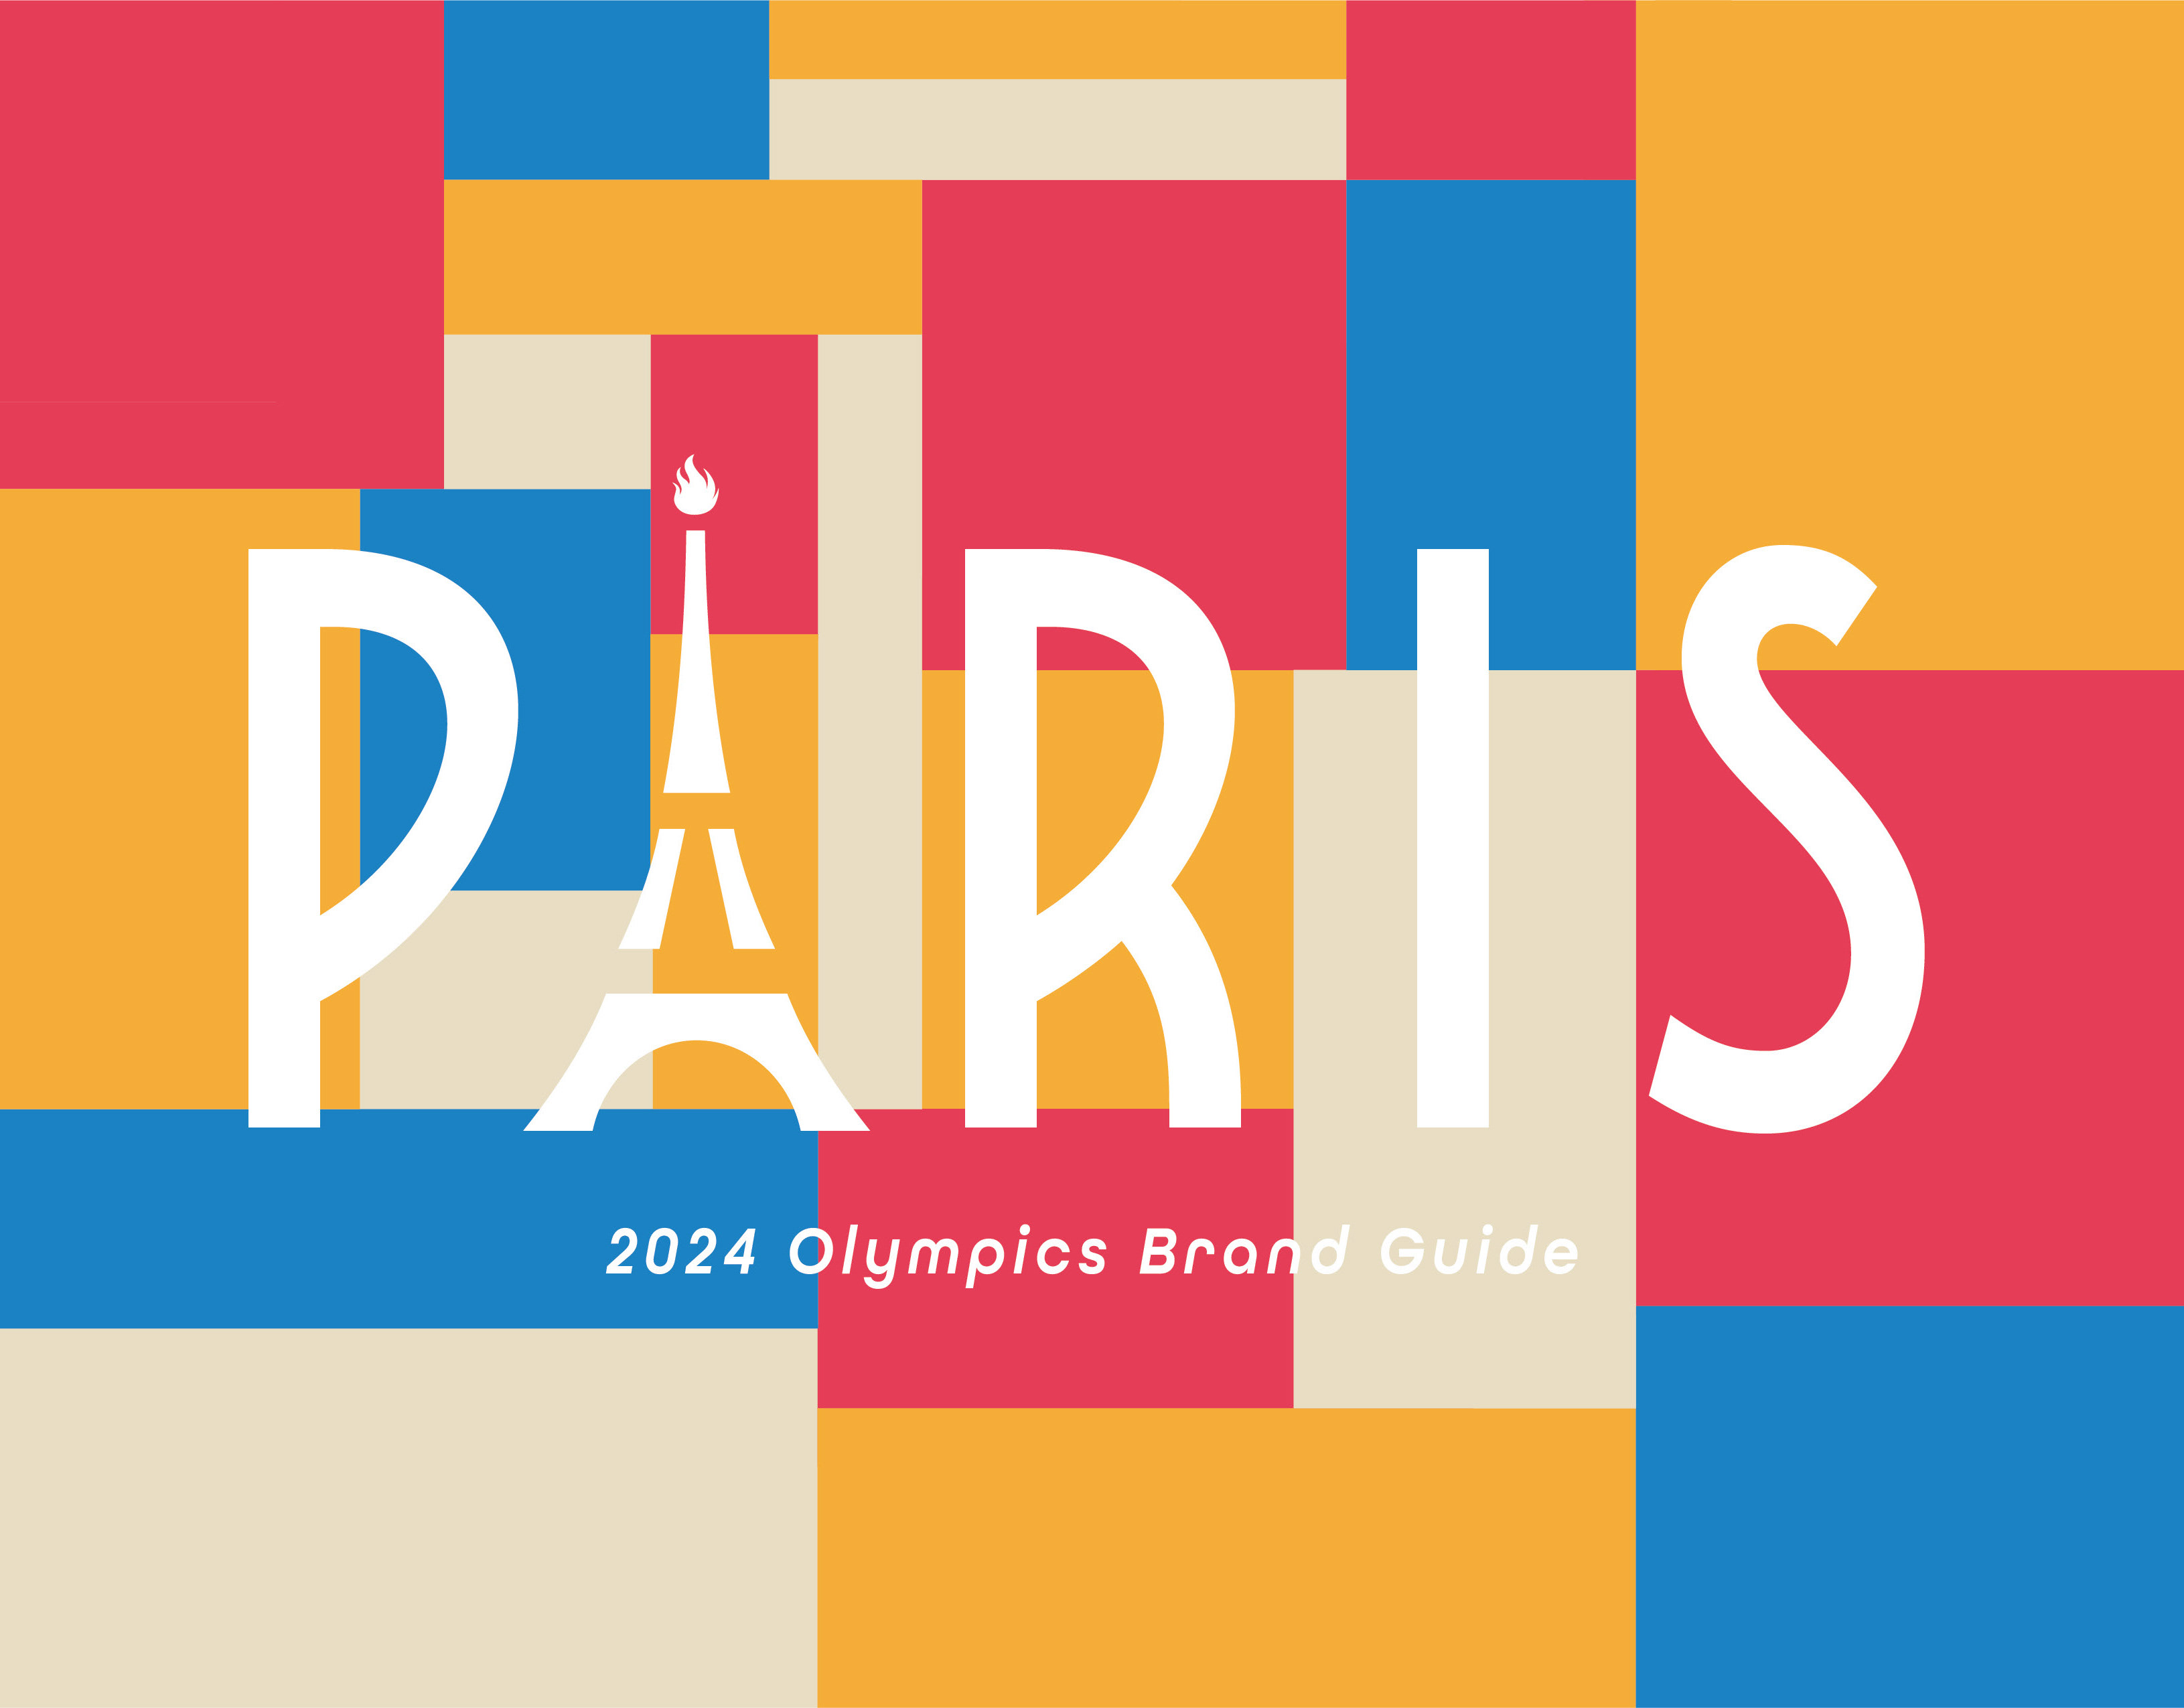 Donovan Baxter 2024 Olympic Games Brand Guide